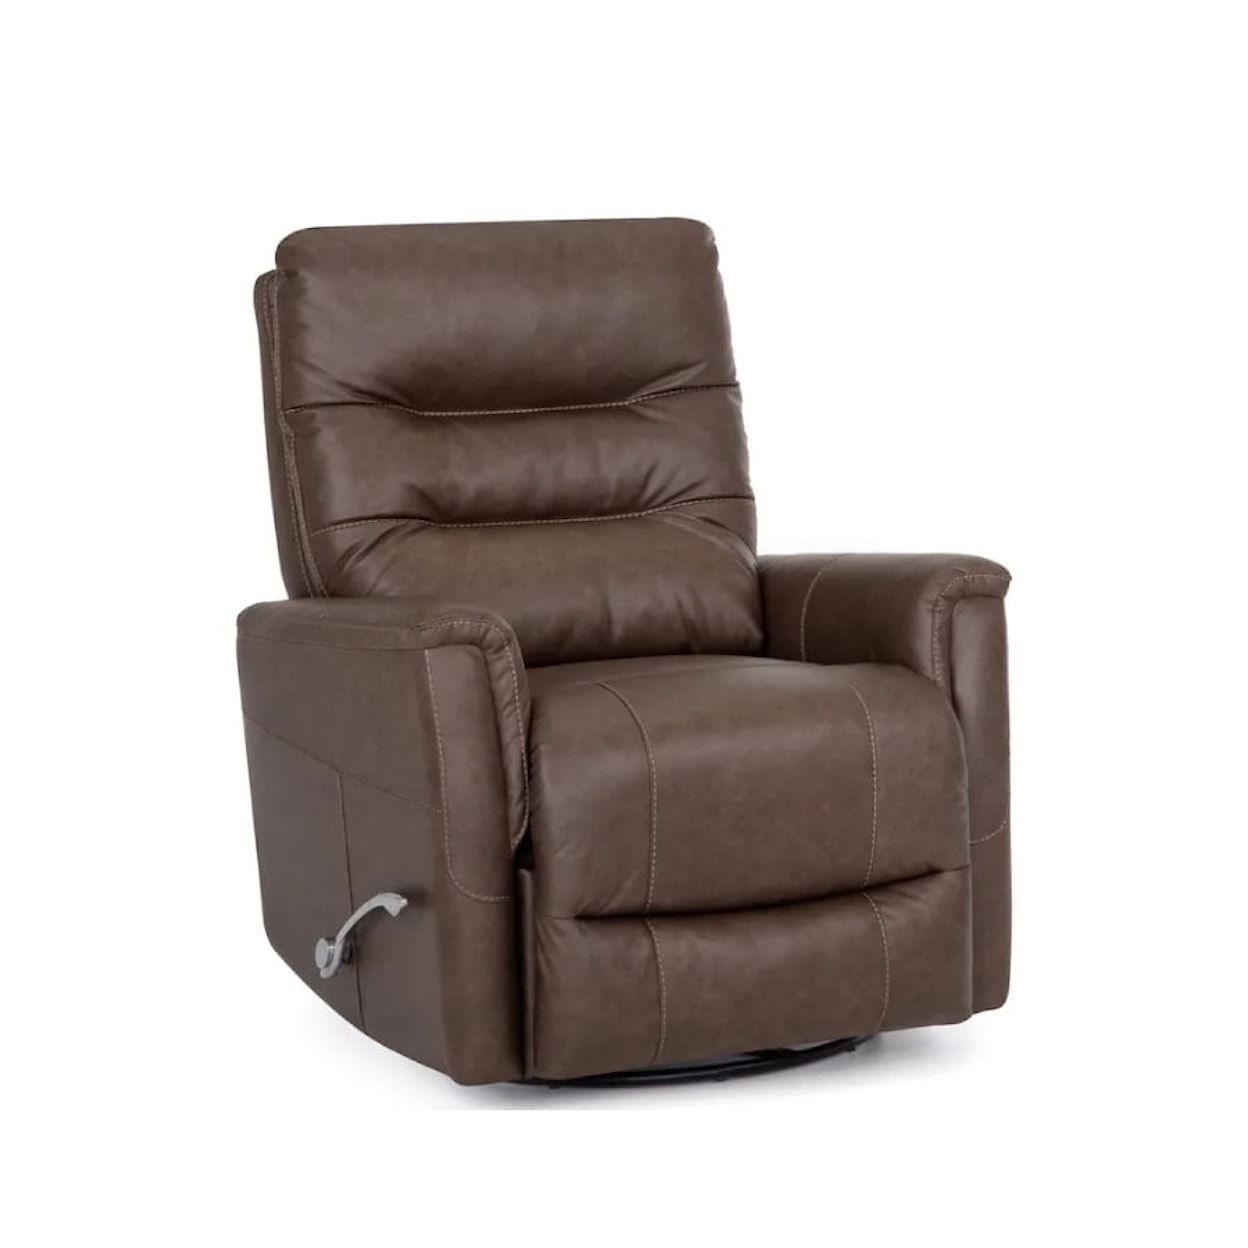 Franklin Recliners LEAH TAUPE SWIVEL GLIDER RECLINER | .